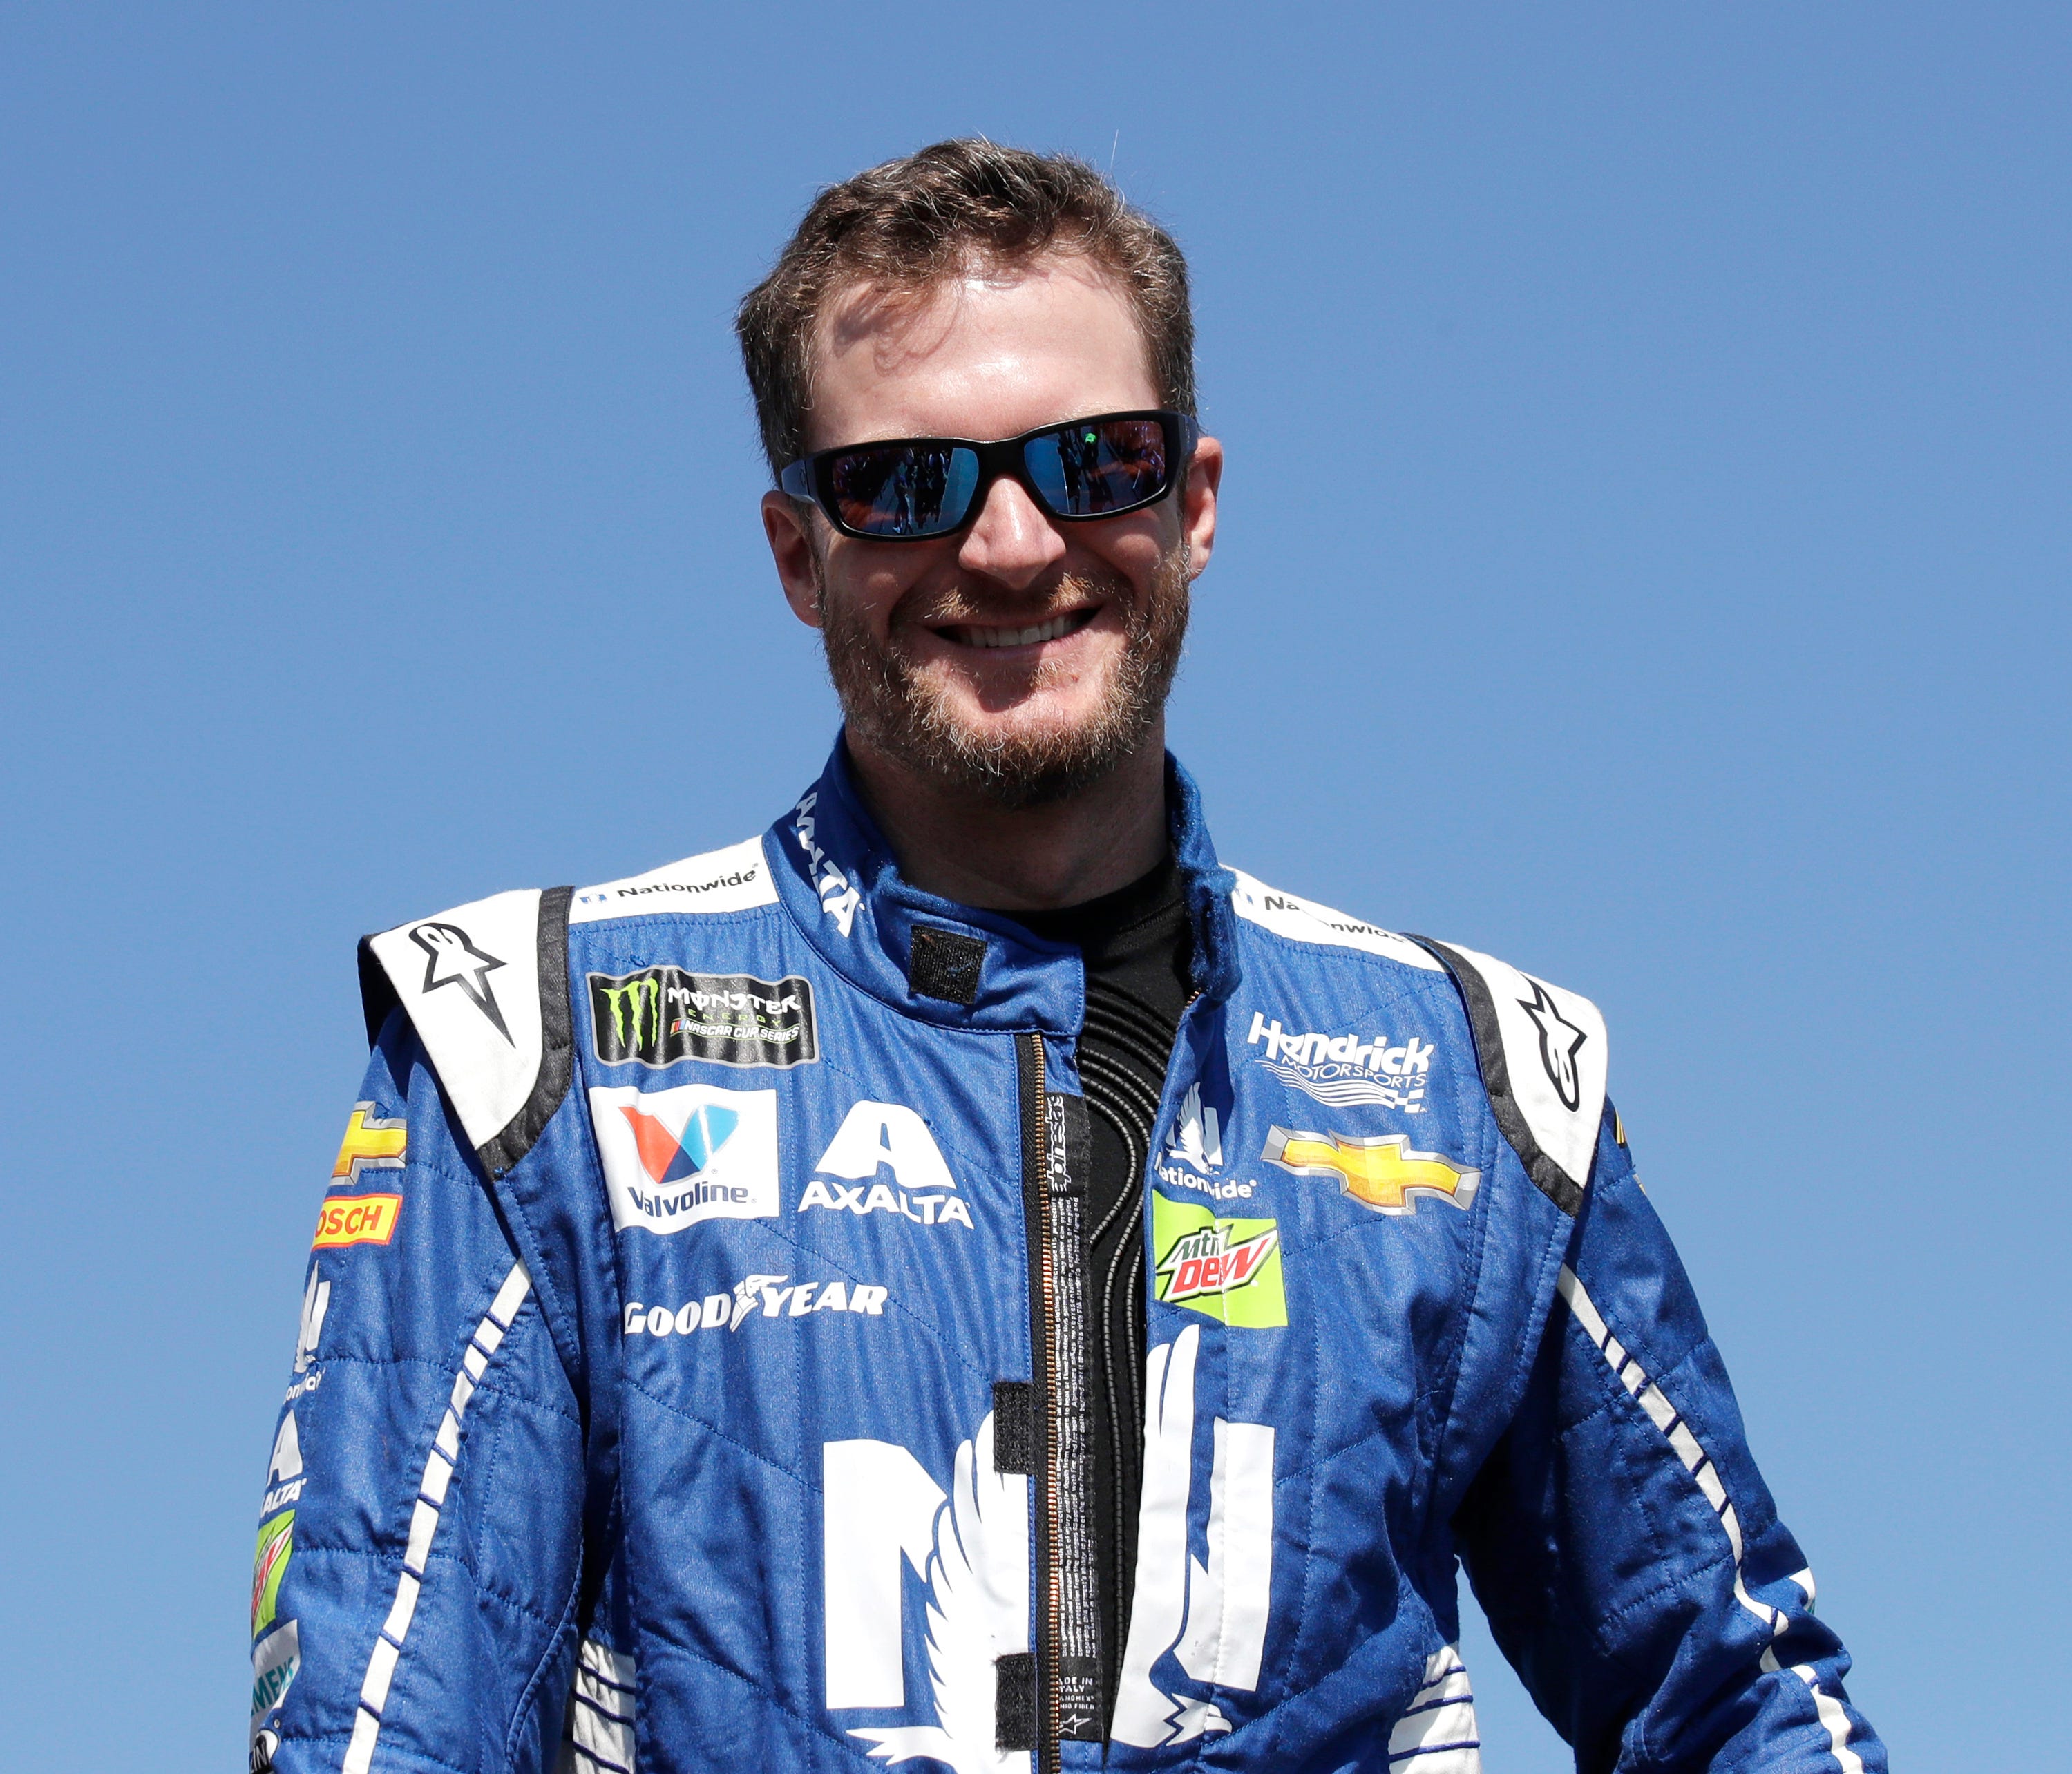 Dale Earnhardt Jr. is introduced prior to the NASCAR Cup Series 300 auto race at New Hampshire Motor Speedway in Loudon, N.H., Sunday, Sept. 24, 2017. (AP Photo/Charles Krupa)